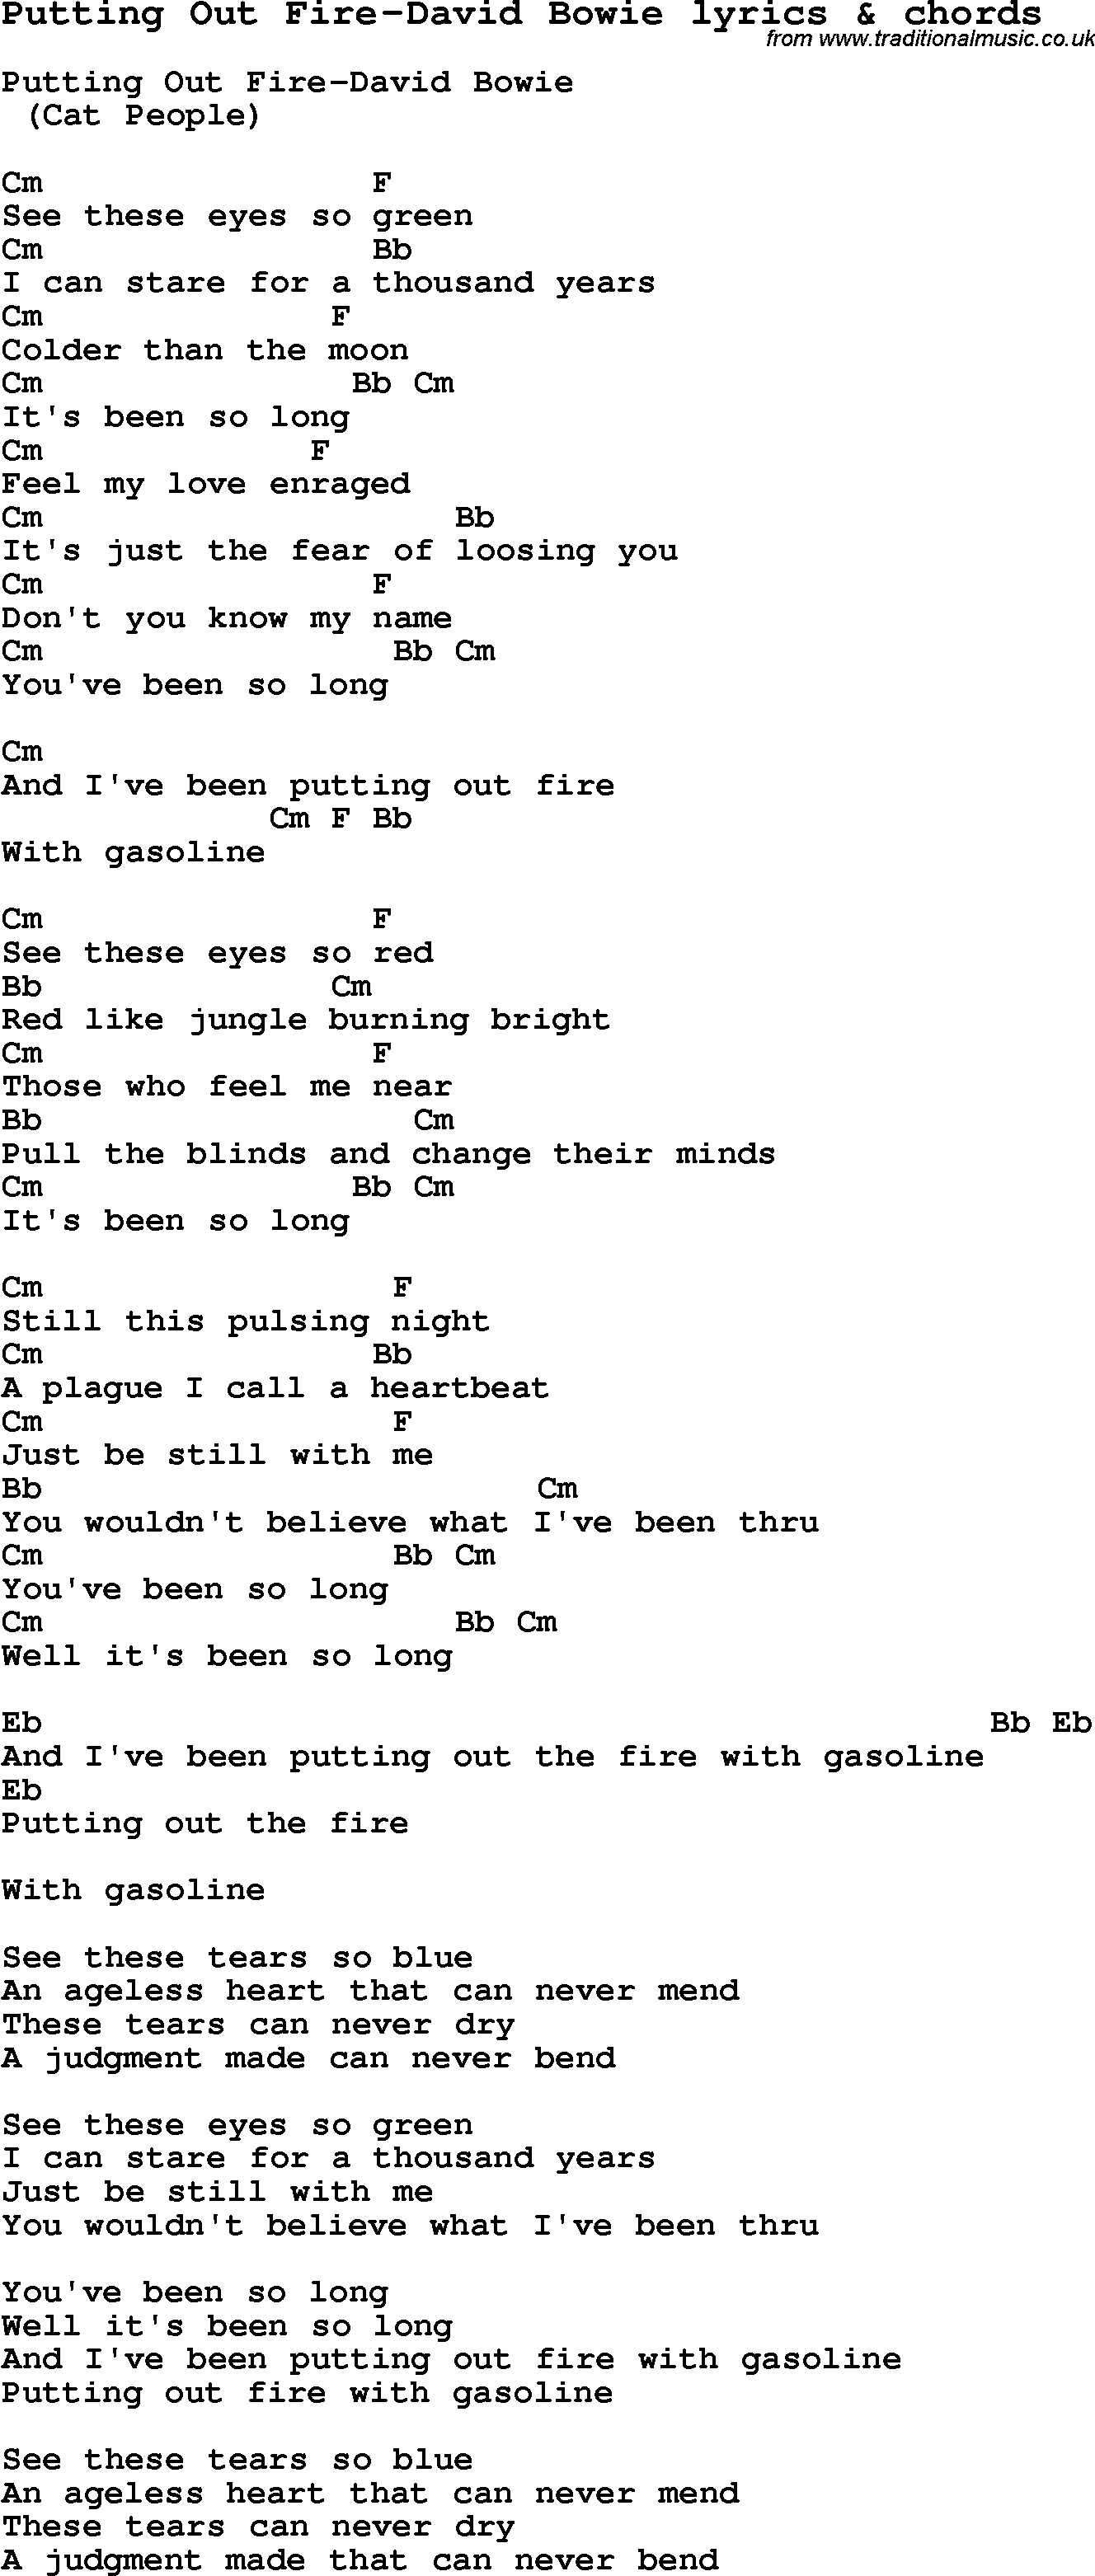 Love Song Lyrics for: Putting Out Fire-David Bowie with chords for Ukulele, Guitar Banjo etc.